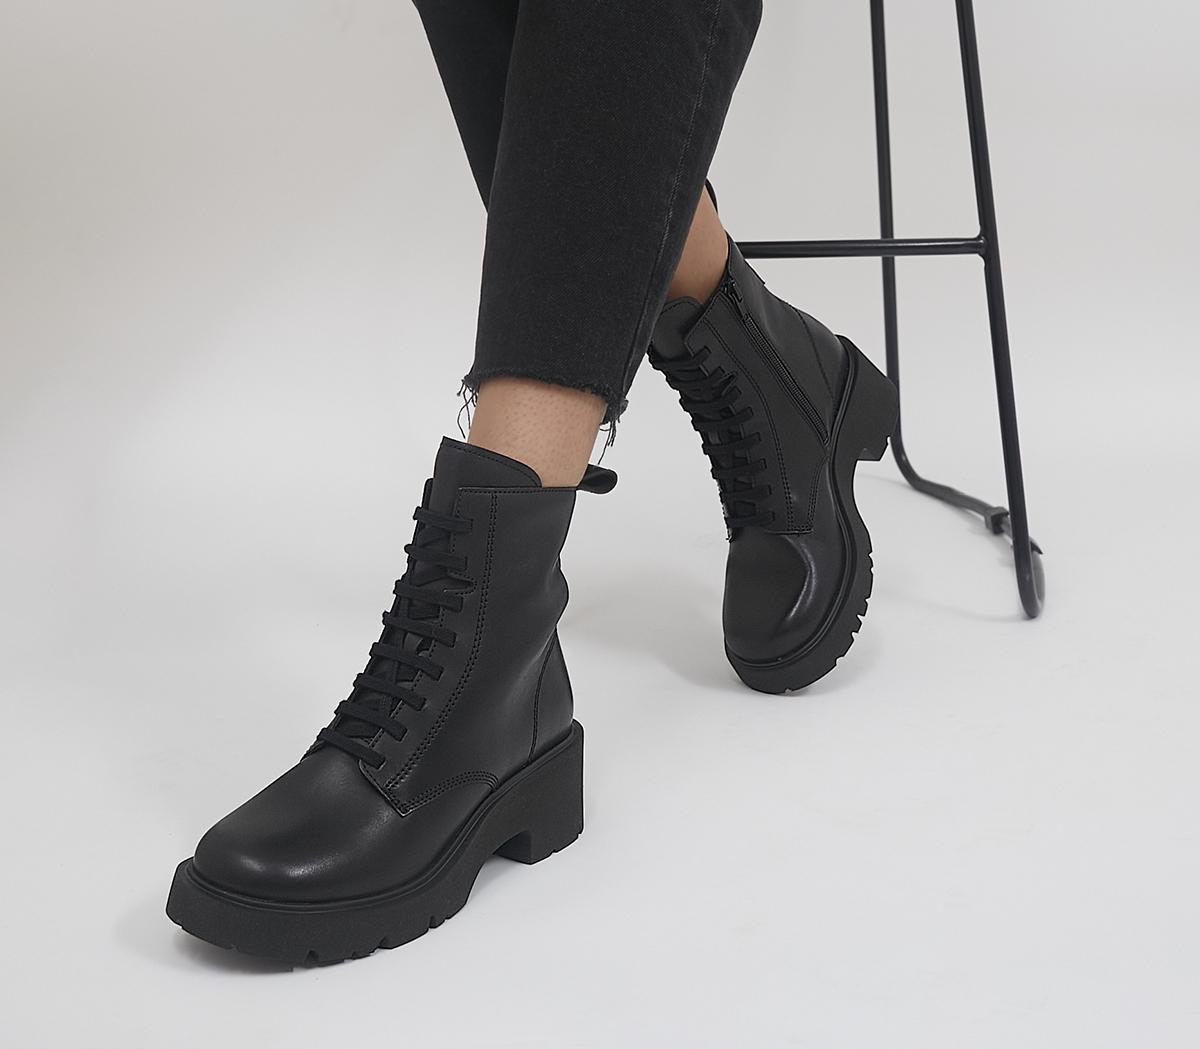 Camper Milah Lace Up Boots Black - Women's Ankle Boots